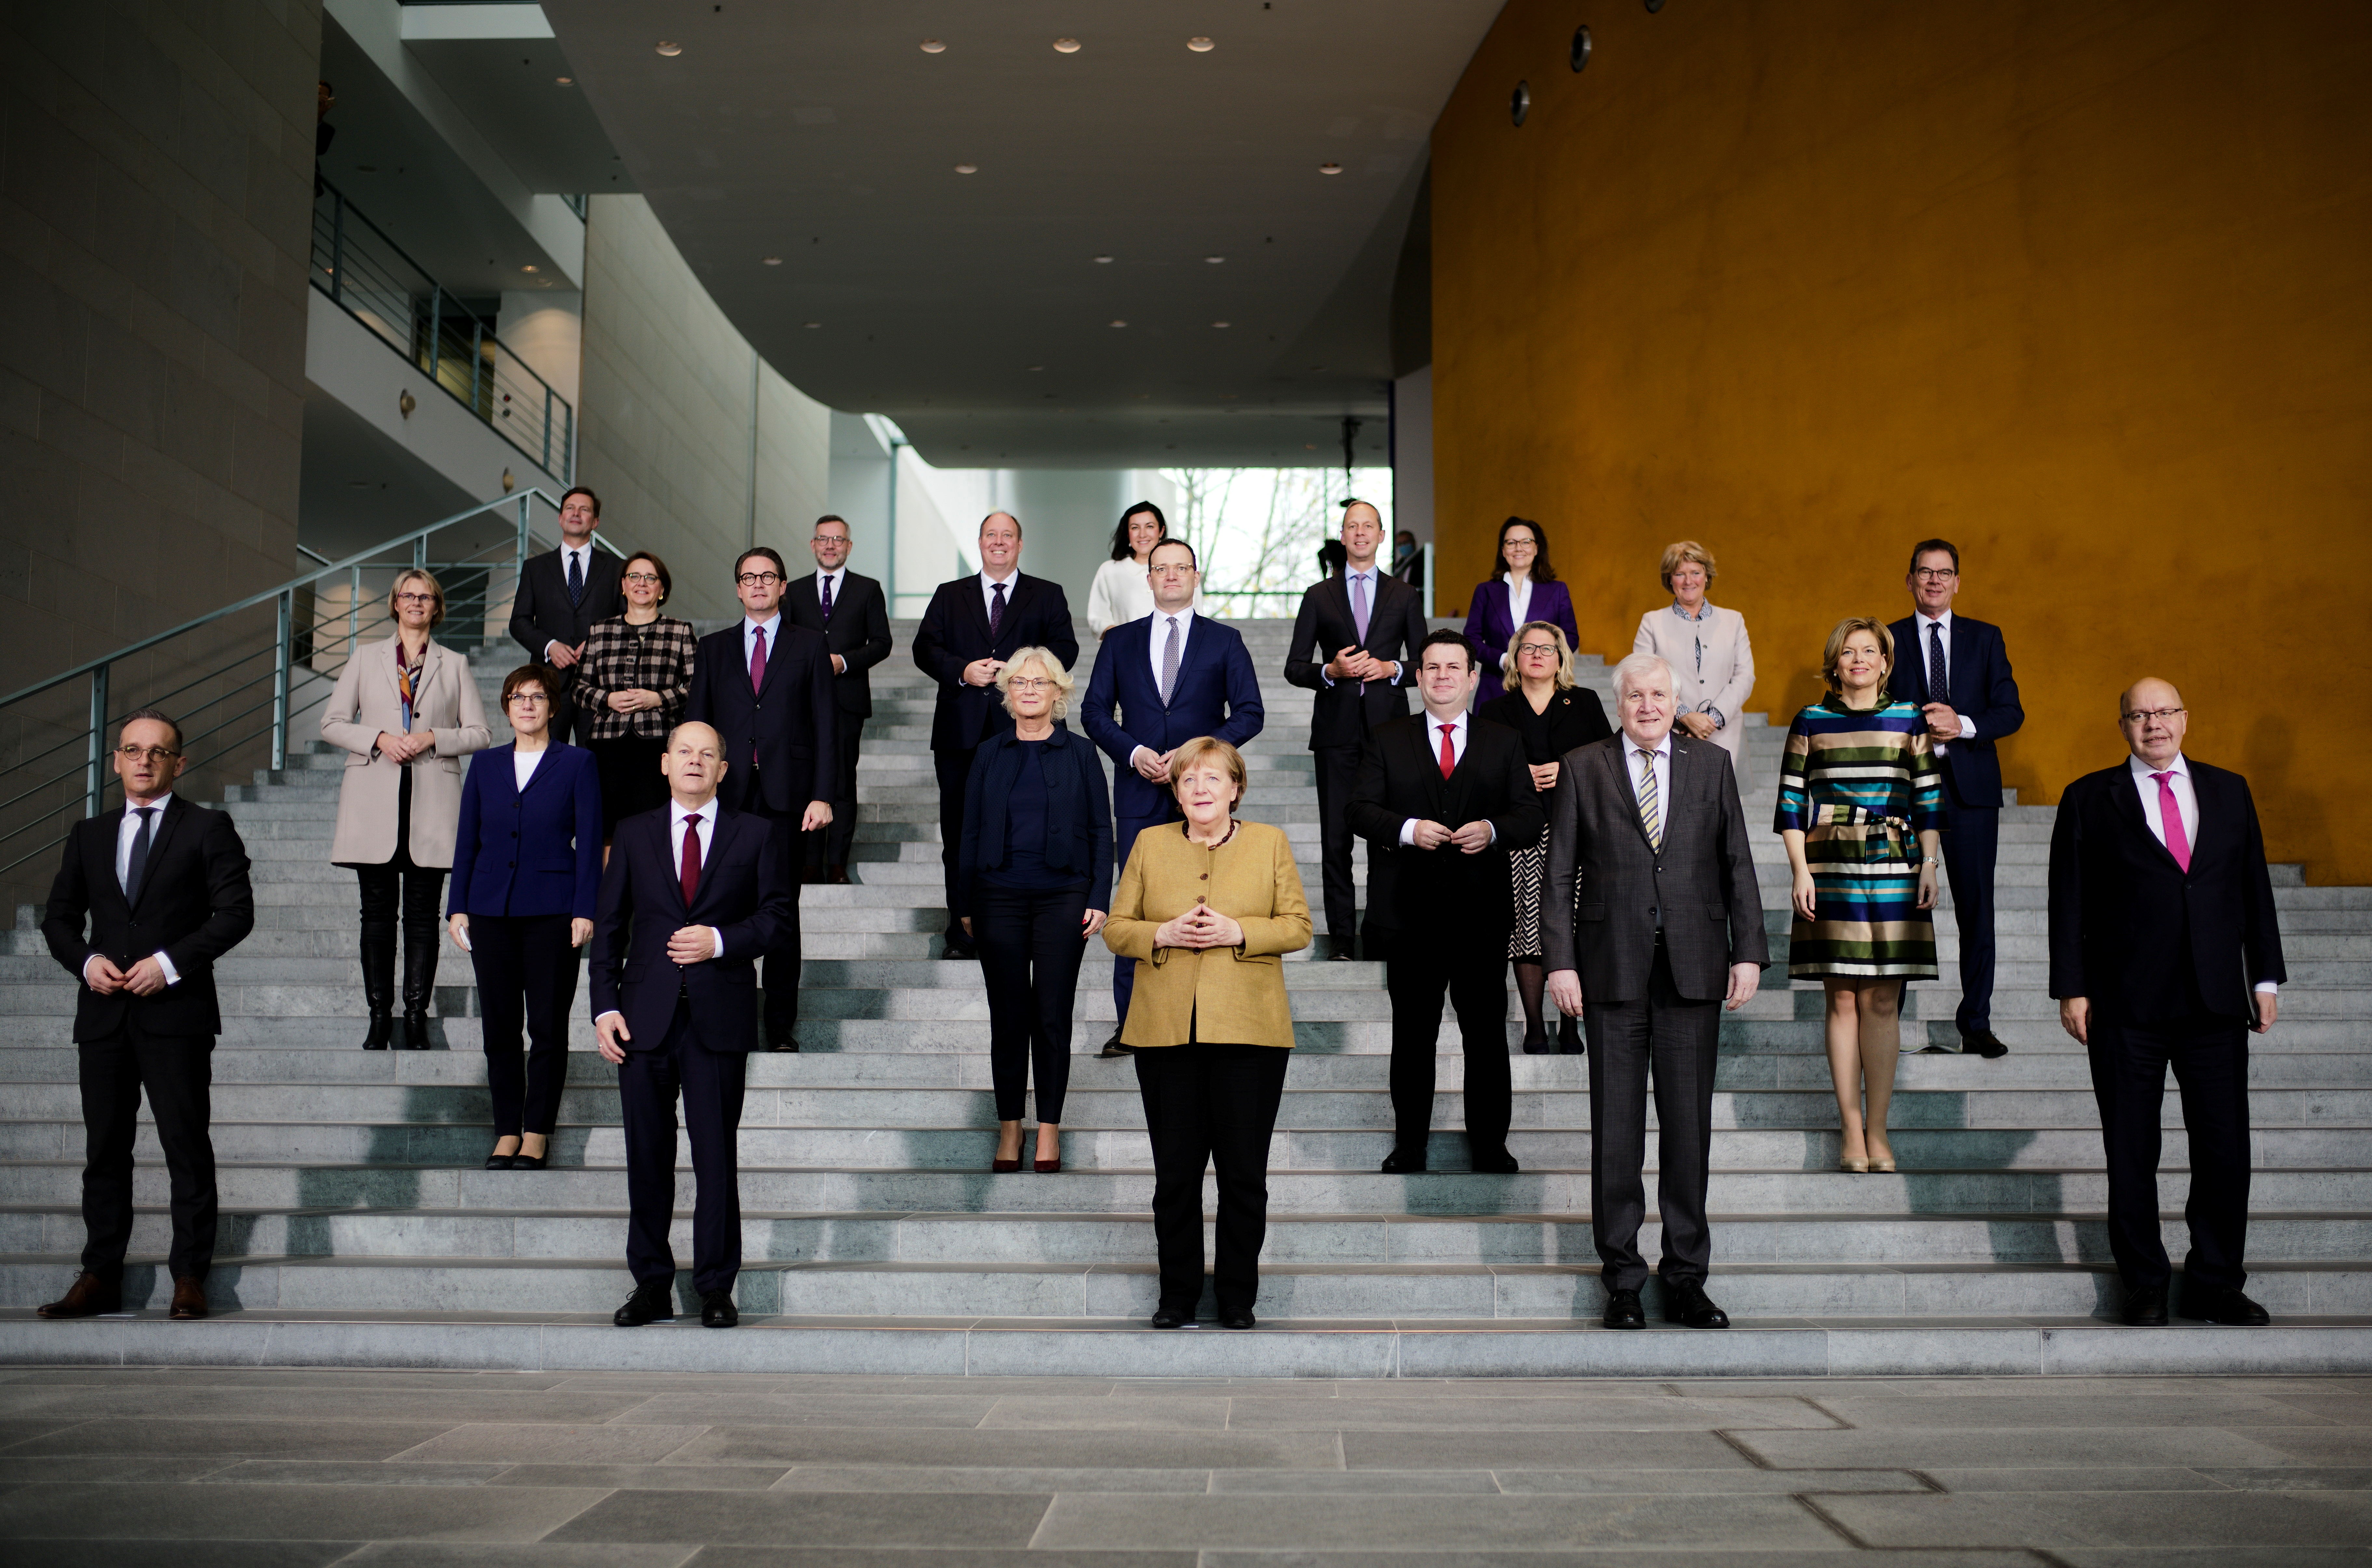 Acting German Chancellor Angela Merkel poses with her government after the weekly cabinet meeting at the Chancellery in Berlin, Germany, November 24, 2021. Markus Schreiber/Pool via REUTERS